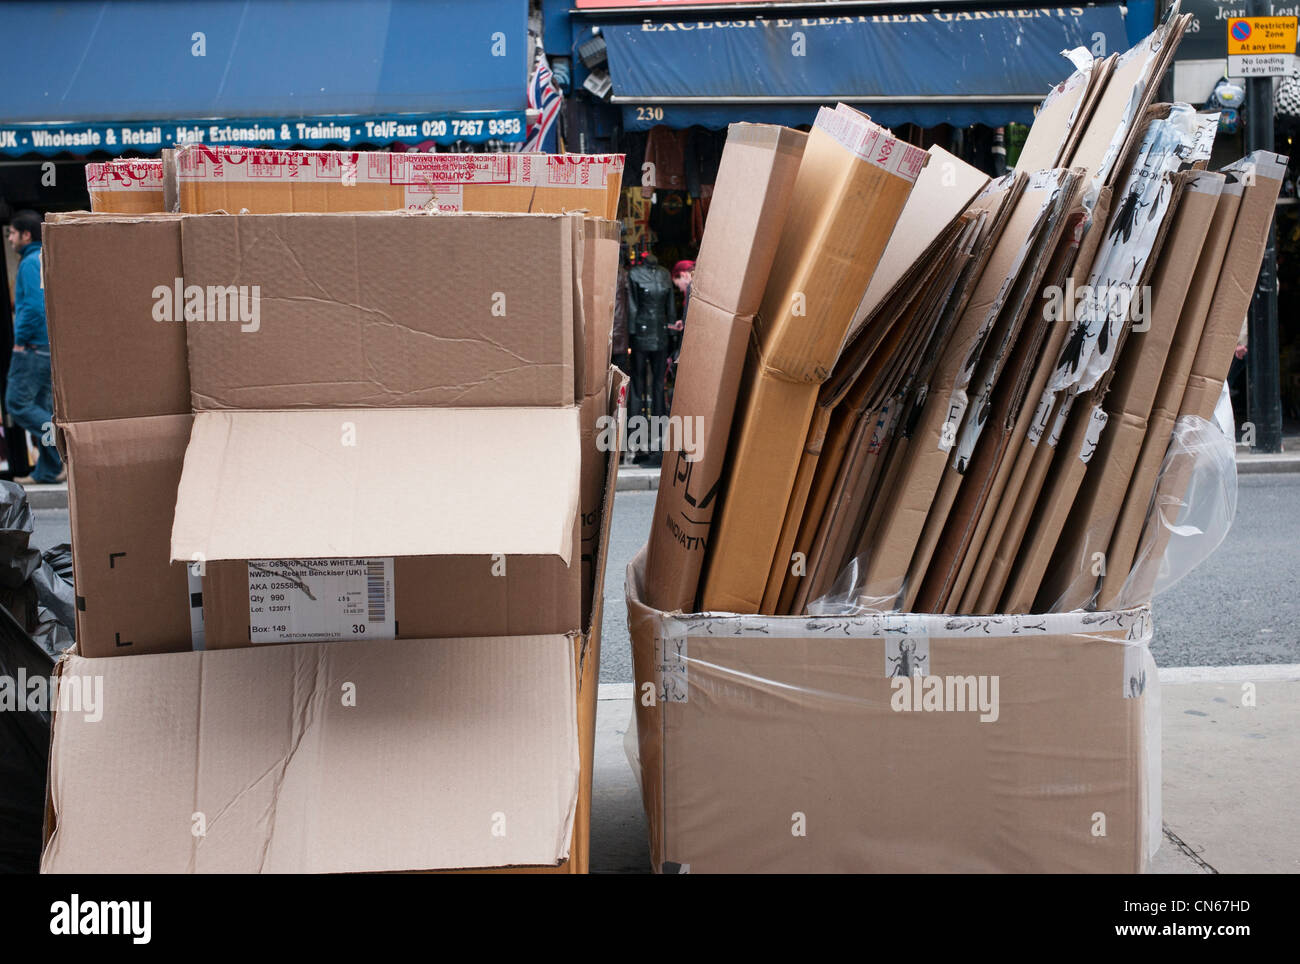 Cardboard boxes and rubbish for recycling, Camden Market, Camden Town, London England Stock Photo